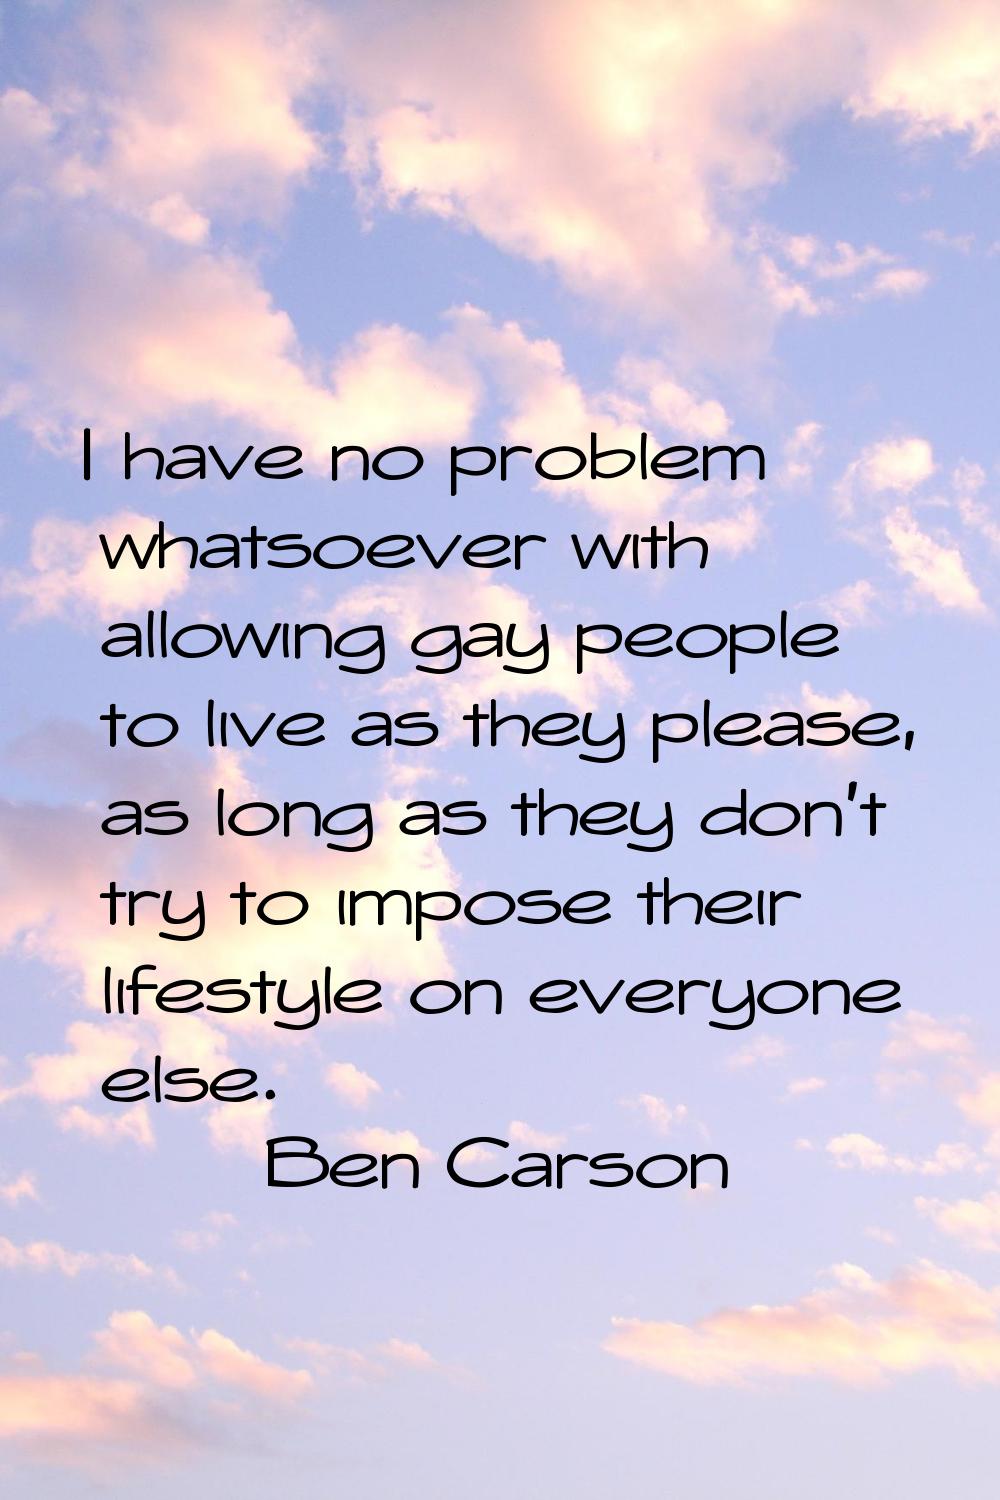 I have no problem whatsoever with allowing gay people to live as they please, as long as they don't